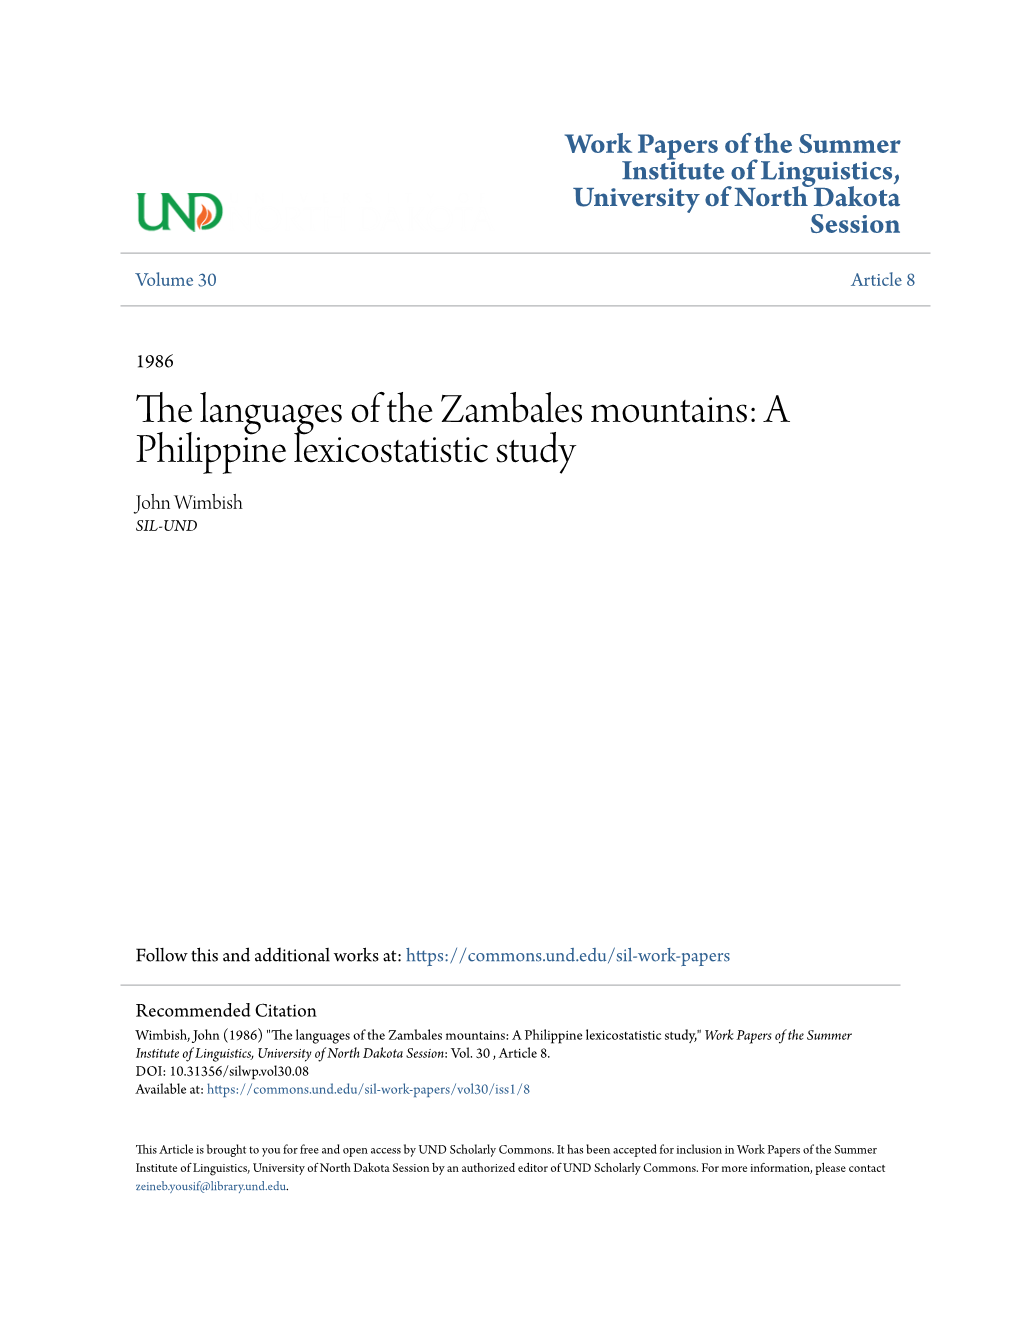 The Languages of the Zambales Mountains